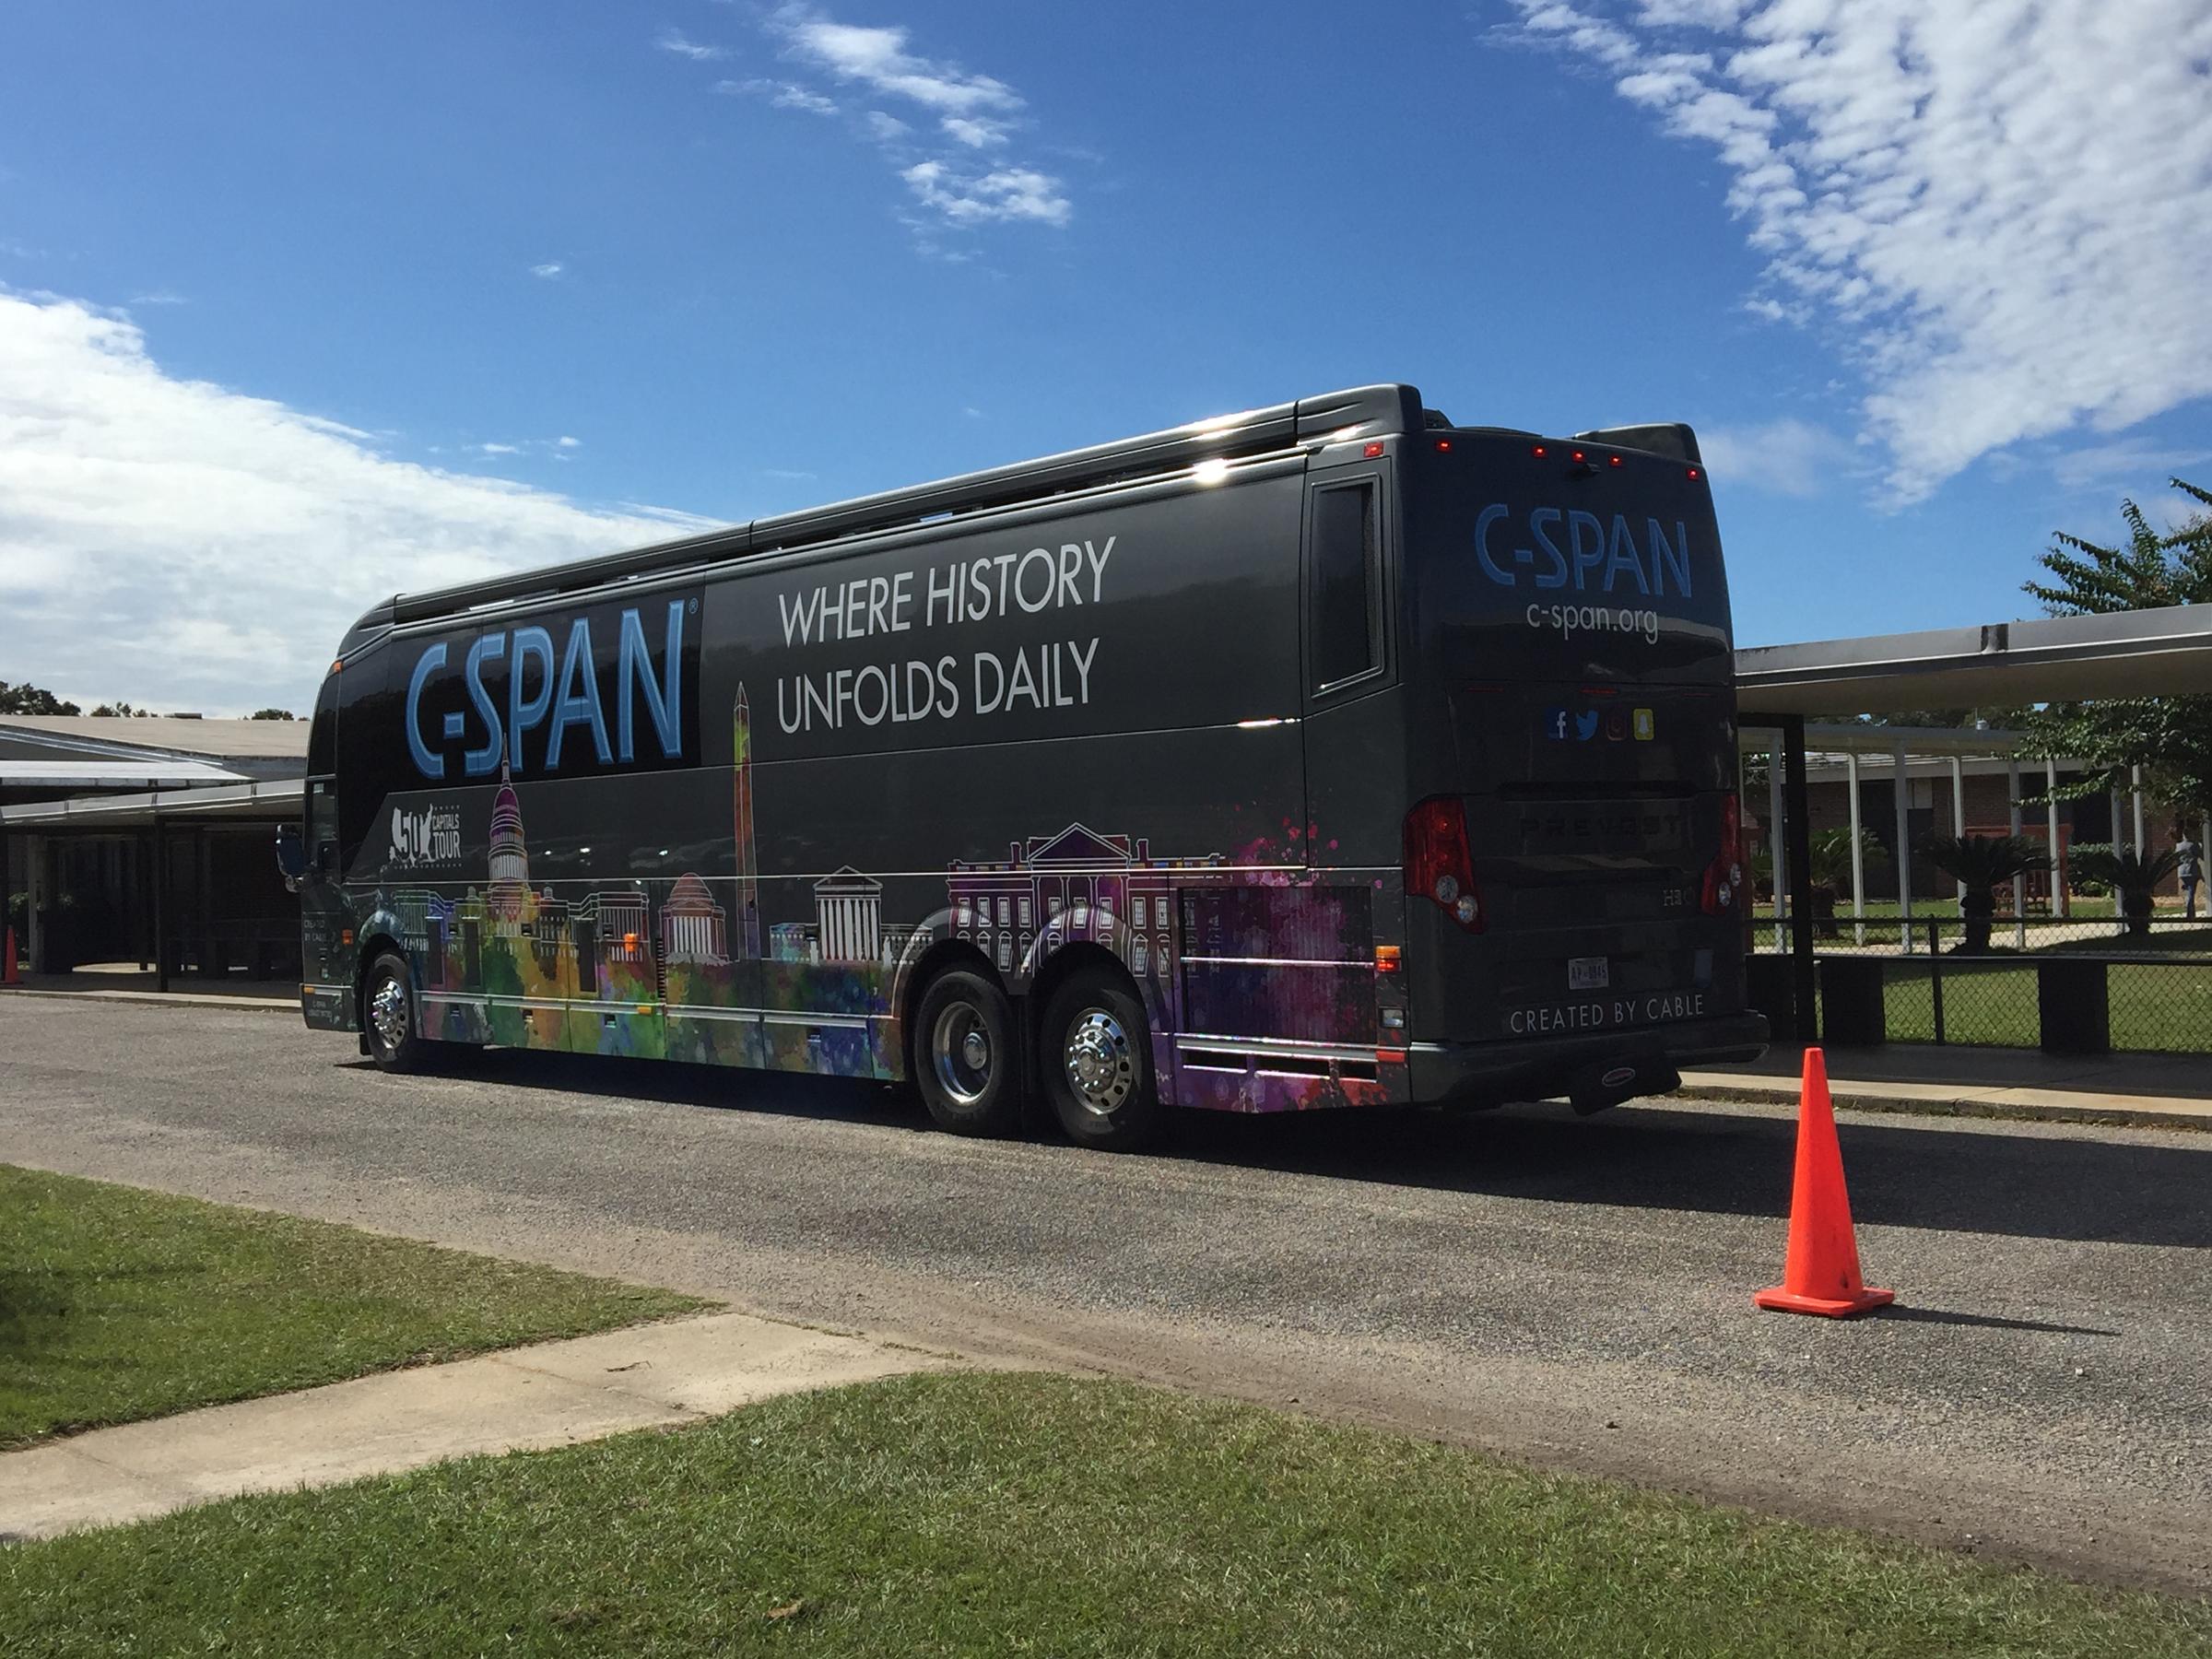 #1417: “The C-SPAN Bus